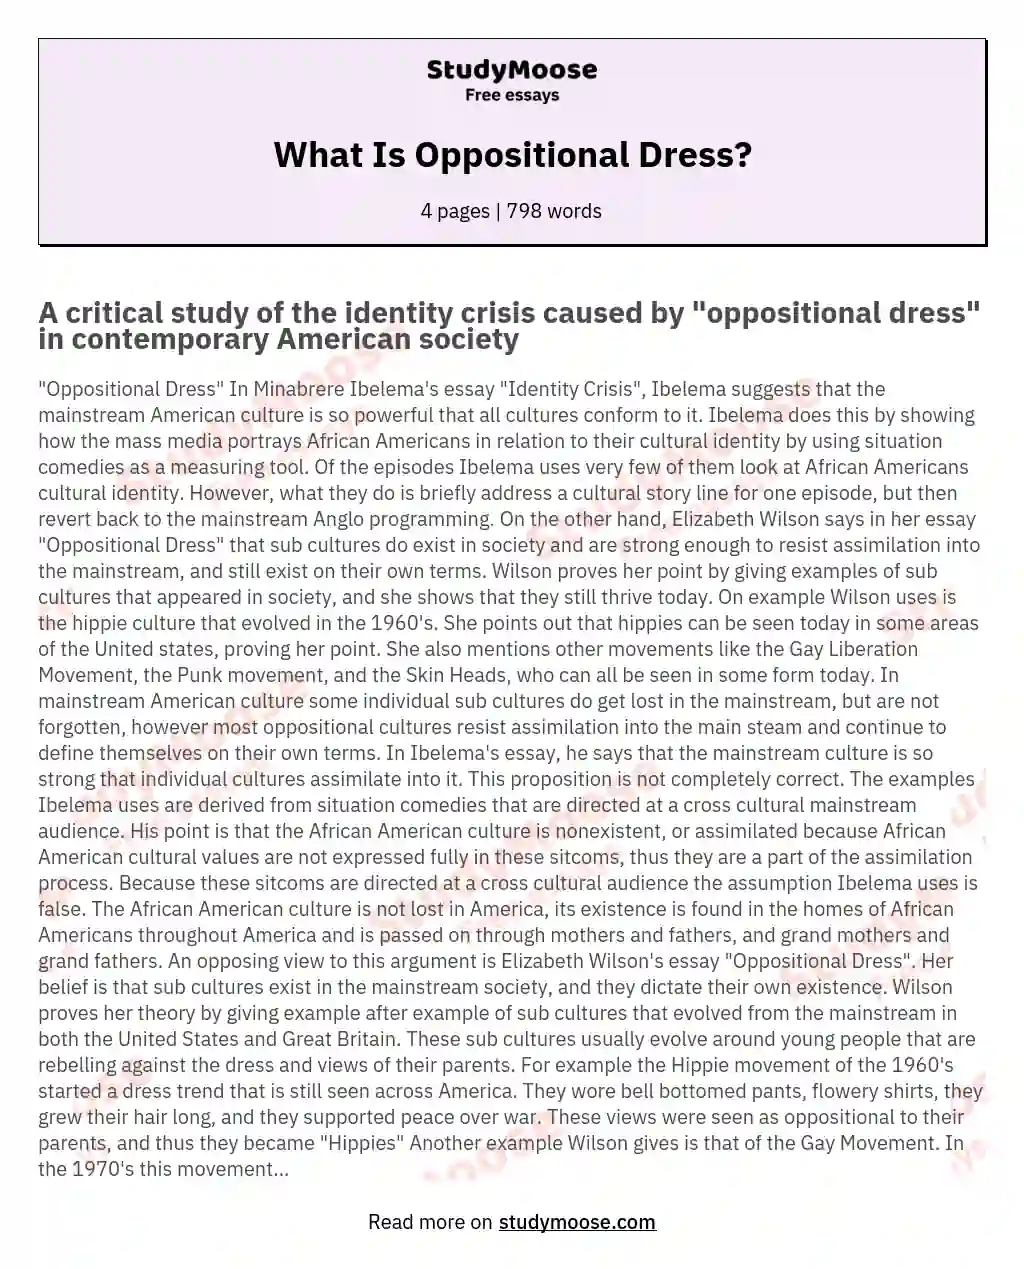 What Is Oppositional Dress?